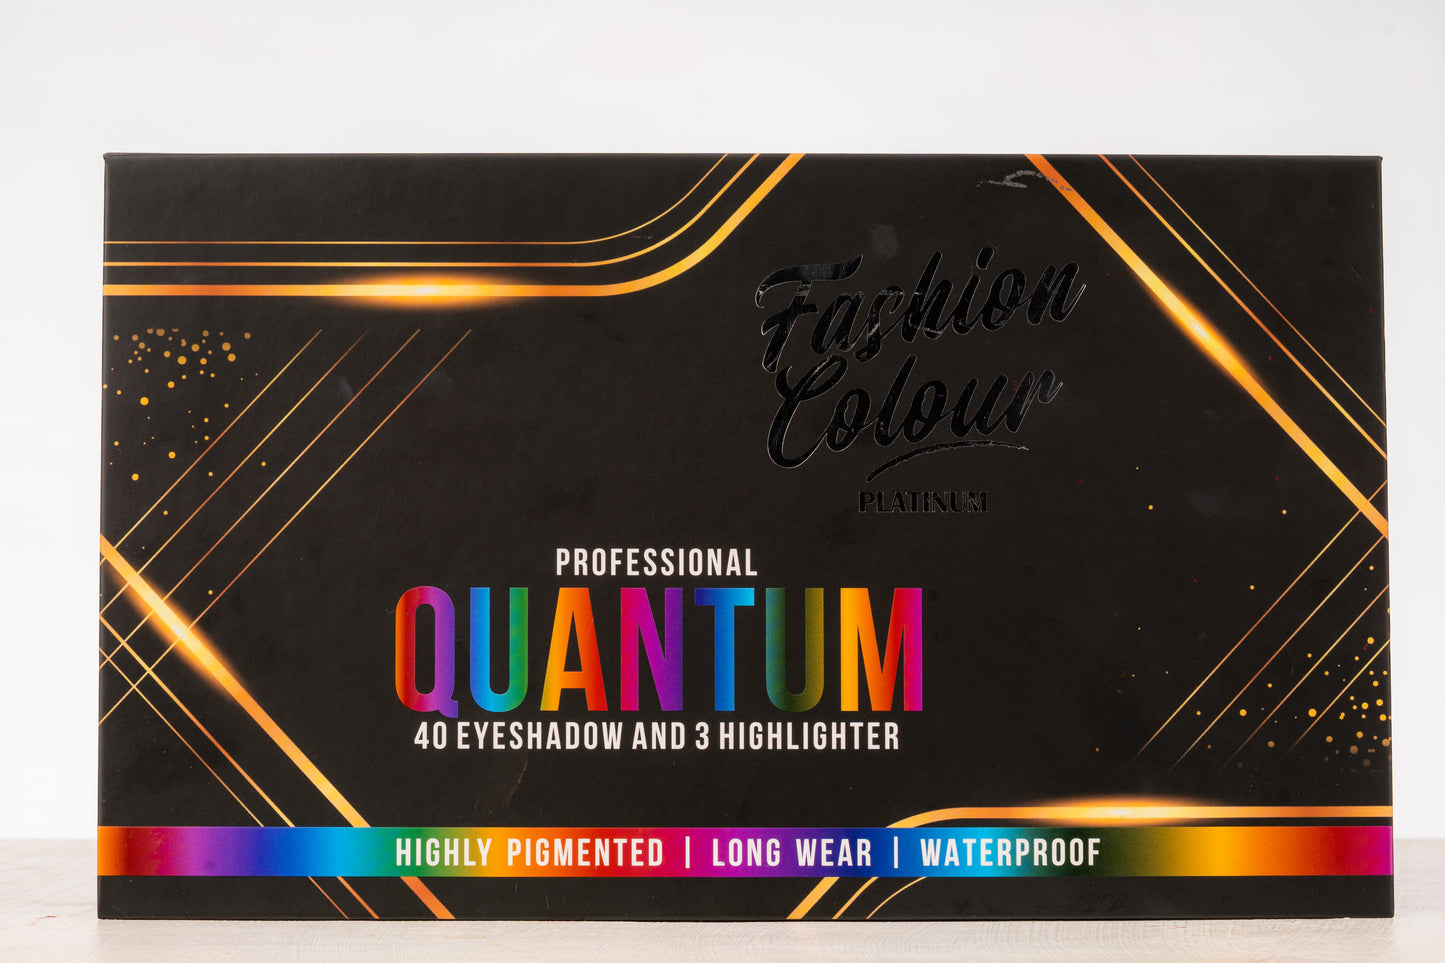 Platinum Professional Quantum 40 Eyeshadow and 3 Highlighter Palette, 70g